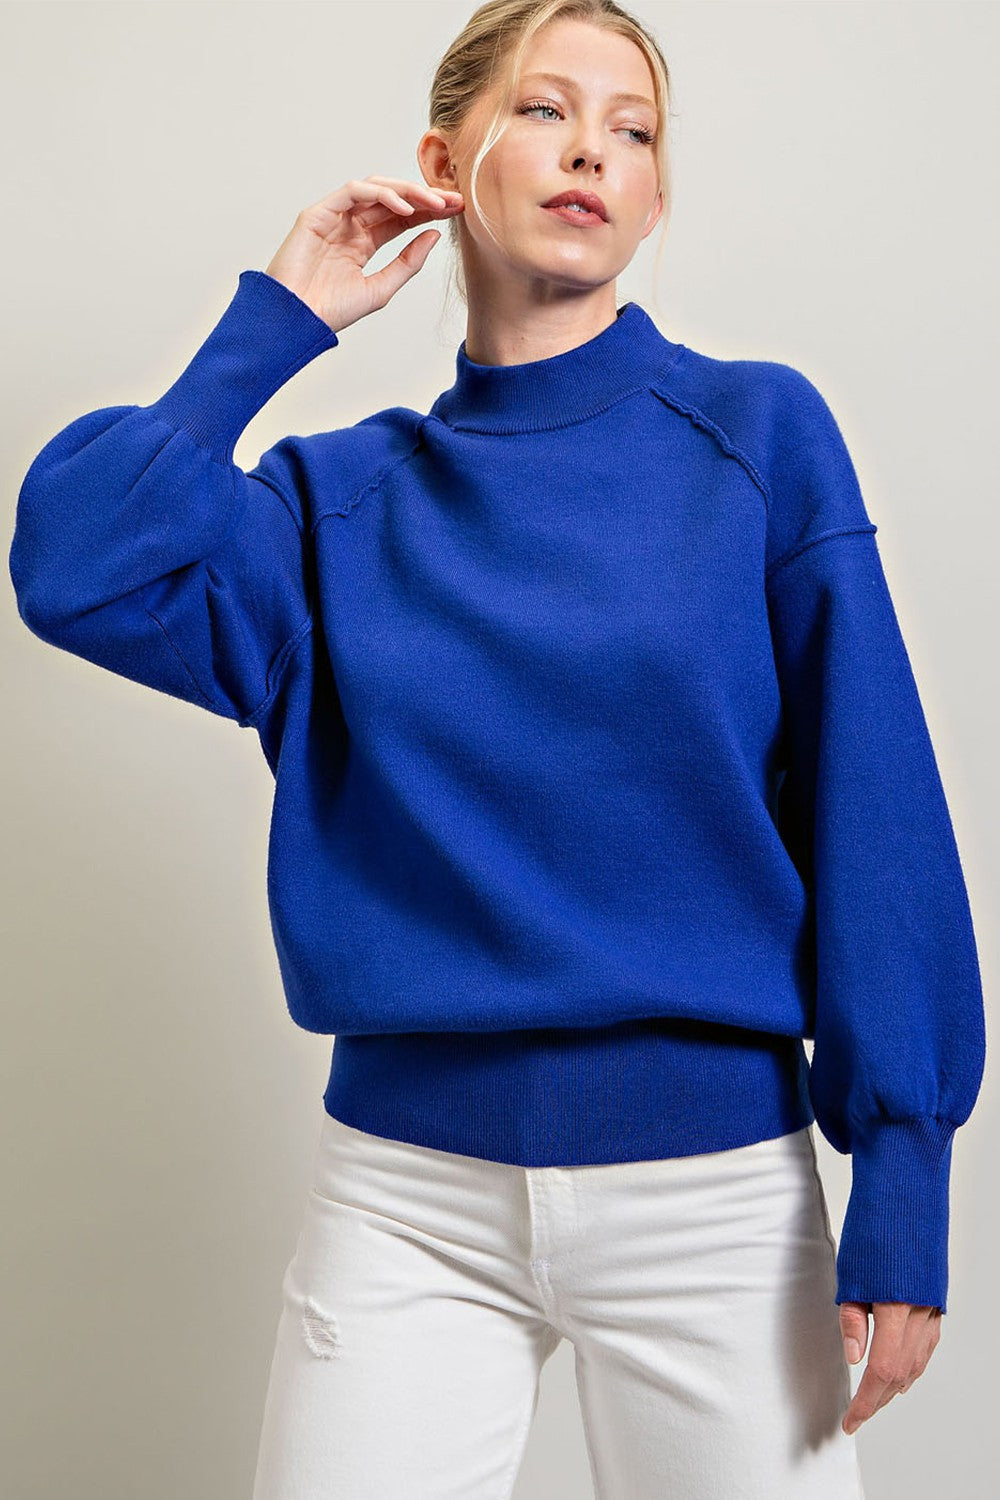 Blue Solid long sleeve sweater featuring gauntlet cuffs to create a bubble sleeve effect, added seams for detail, a crew neckline, and a ribbed bottom band and neck.